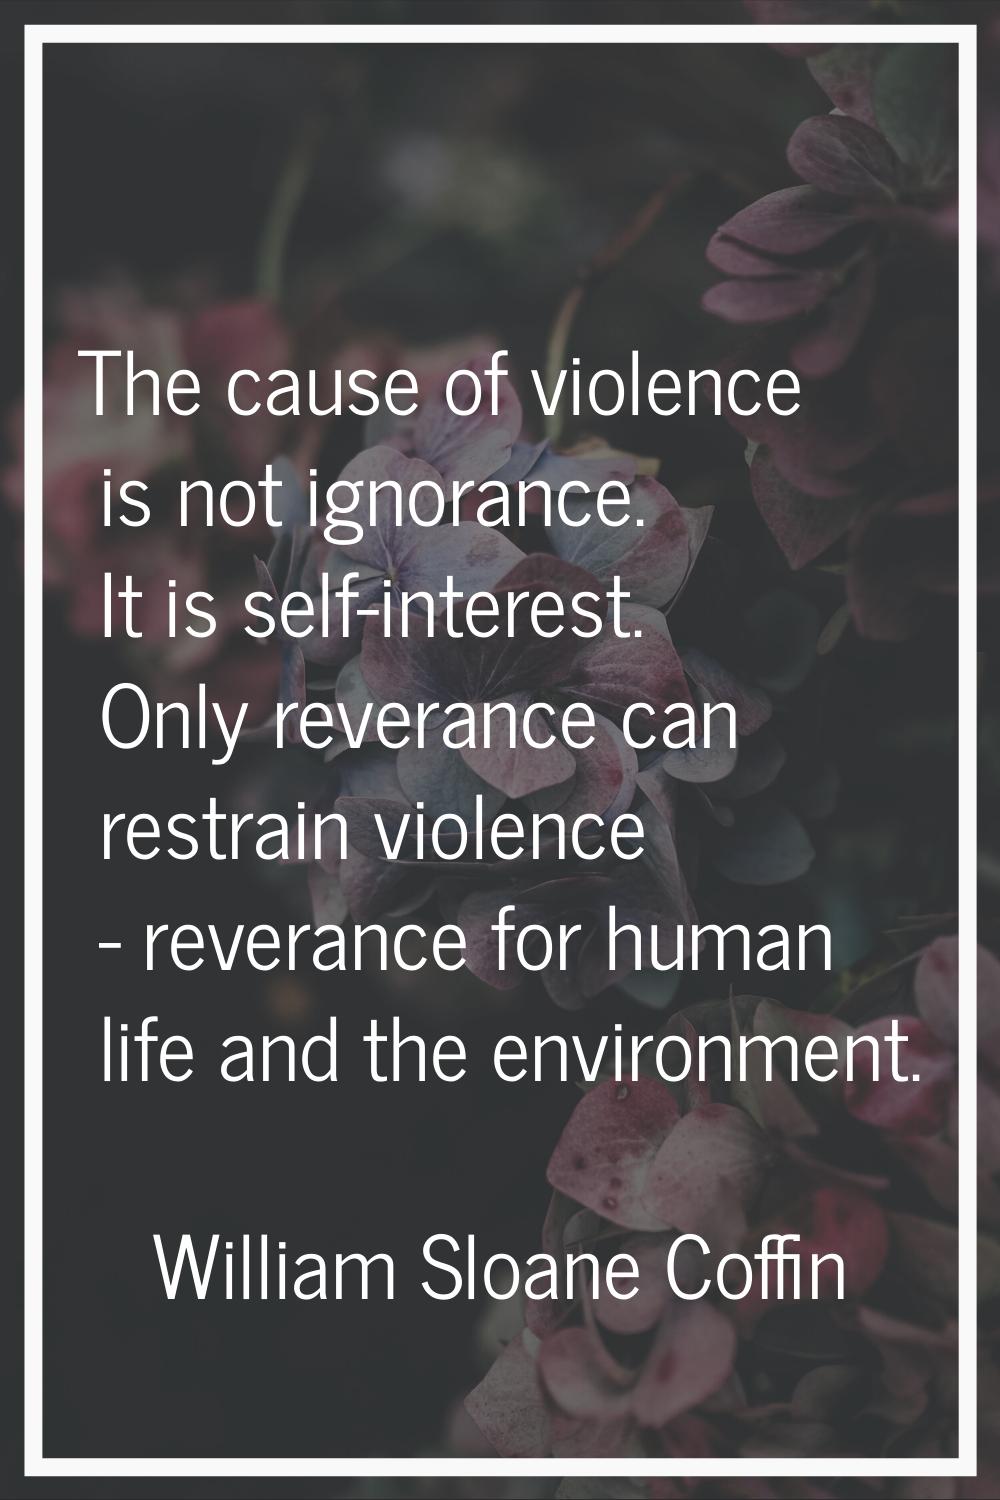 The cause of violence is not ignorance. It is self-interest. Only reverance can restrain violence -